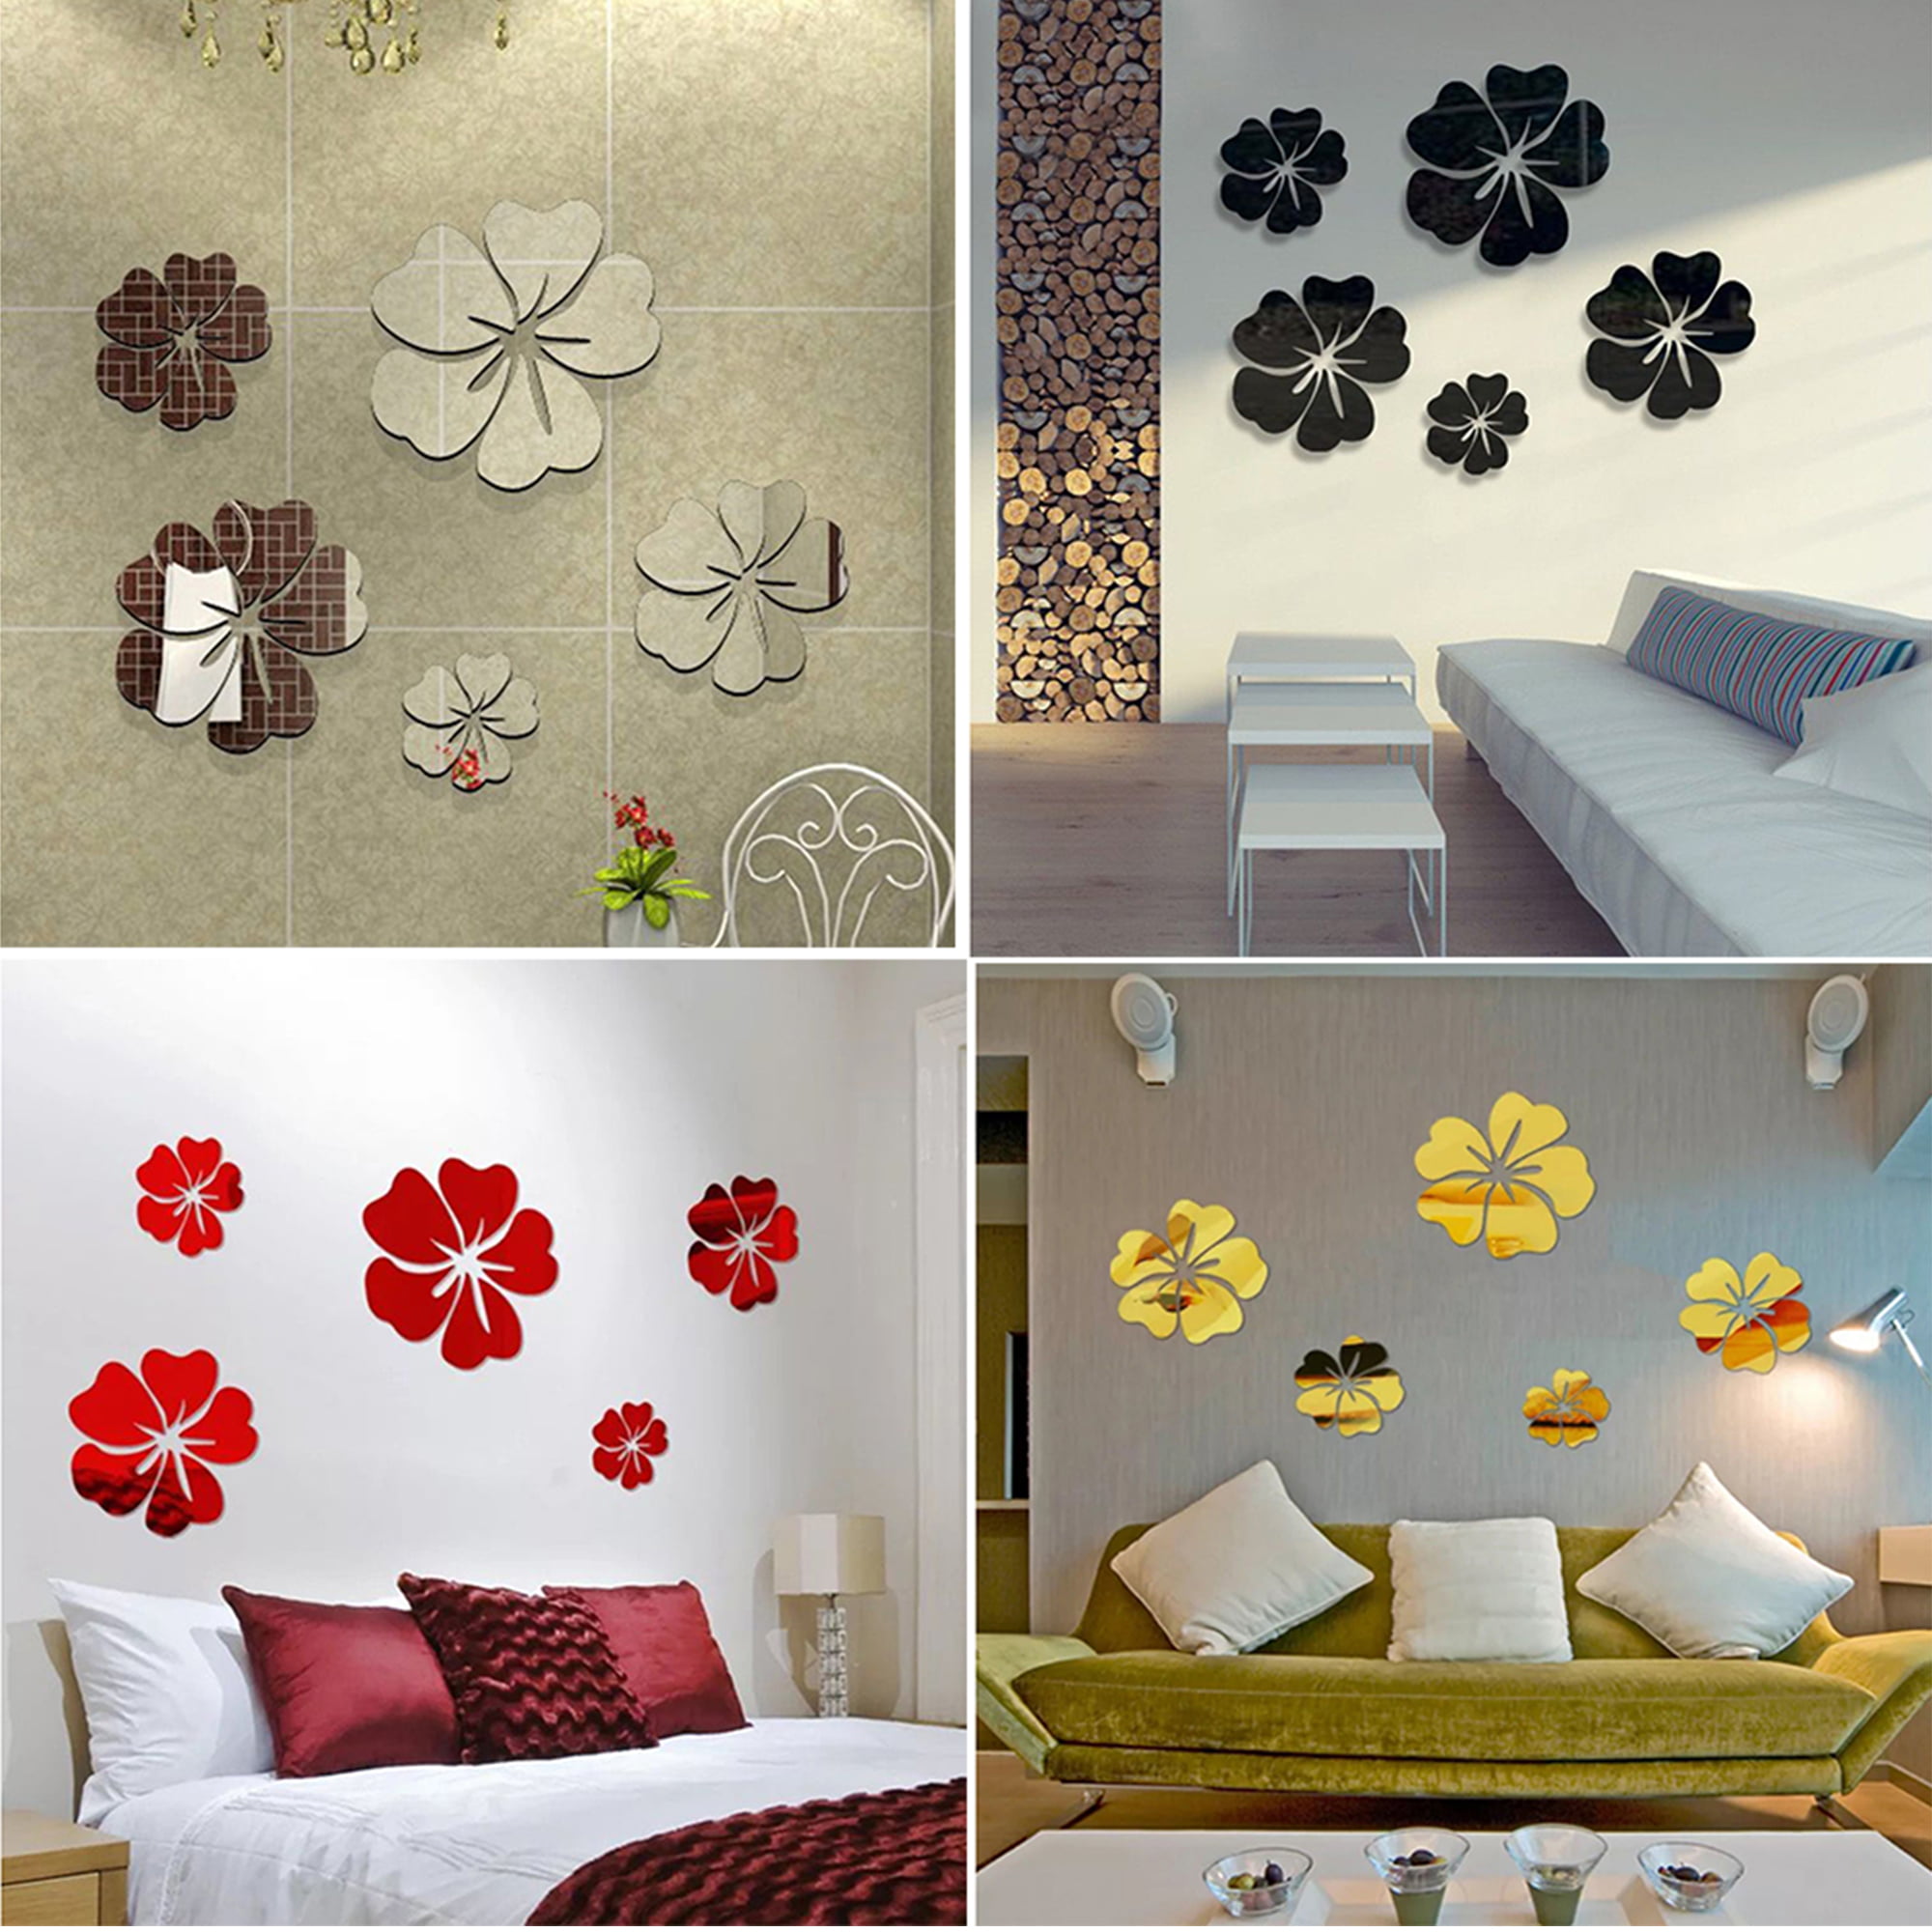 3 Pcs Art Removable Flower Wall Sticker Home Decal Mural Room Decor